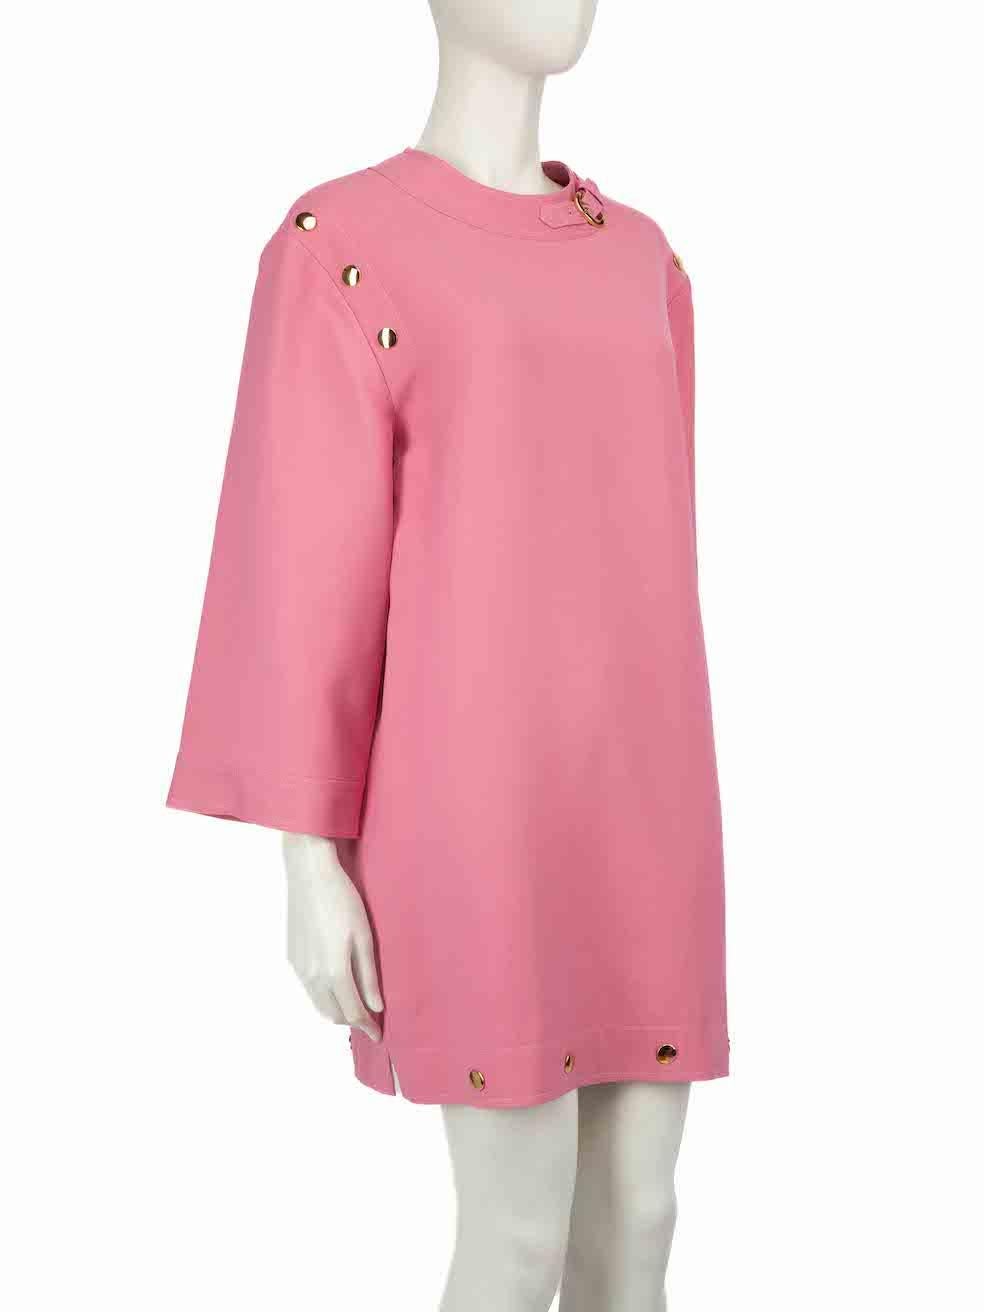 CONDITION is Very good. Minimal wear to dress is evident. Minimal wear to dress is seen with a few pulls to the weave in the front and some at the back near the hemline on this used Gucci designer resale item.
 
 
 
 Details
 
 
 Pink
 
 Silk
 
